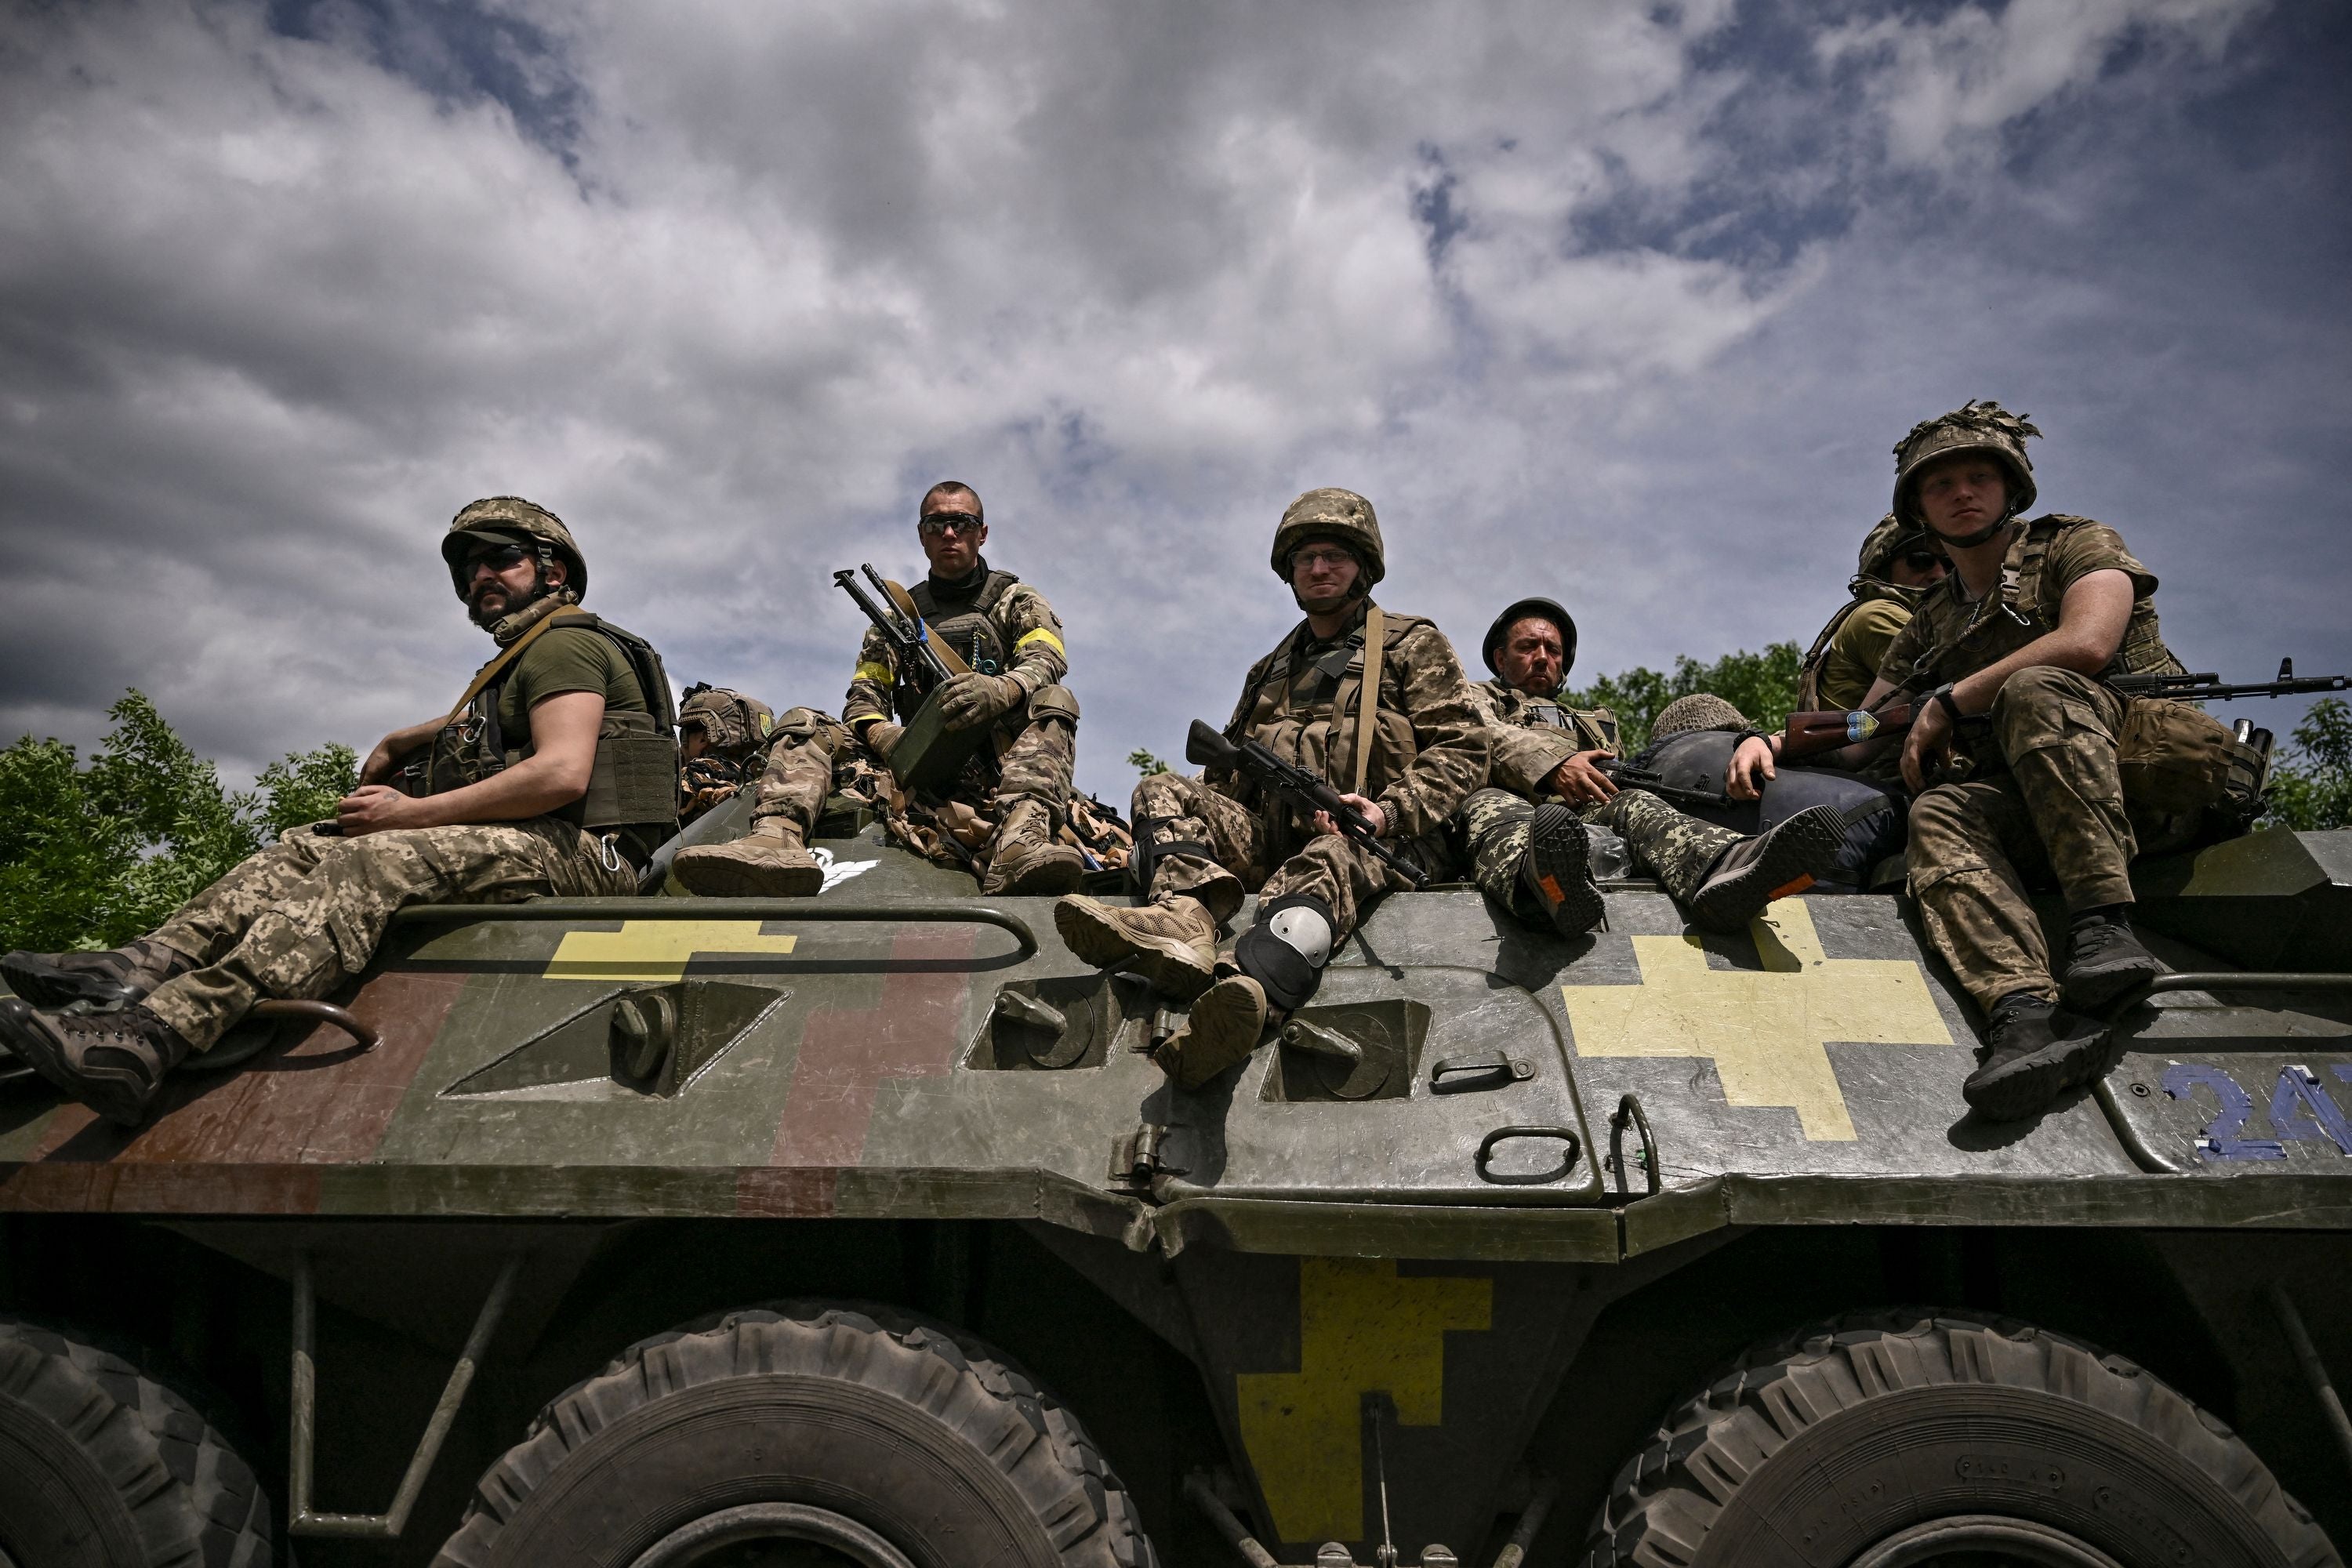 Ukrainian troops sit on an armoured vehicle as they move back from the front line near the city of Slovyansk in the Donbas